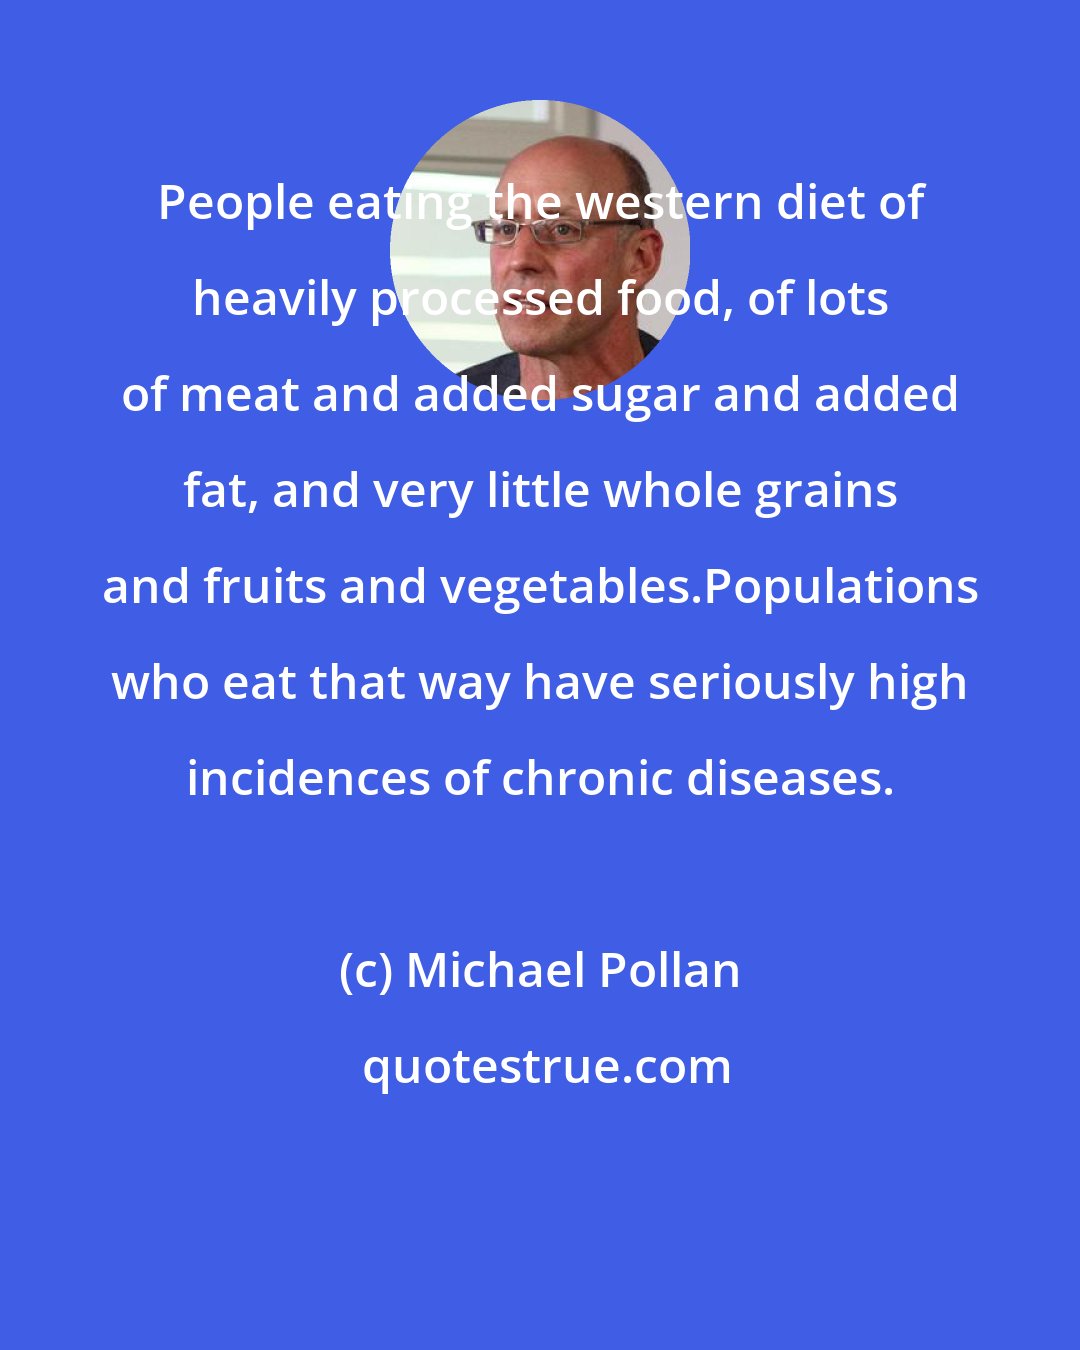 Michael Pollan: People eating the western diet of heavily processed food, of lots of meat and added sugar and added fat, and very little whole grains and fruits and vegetables.Populations who eat that way have seriously high incidences of chronic diseases.